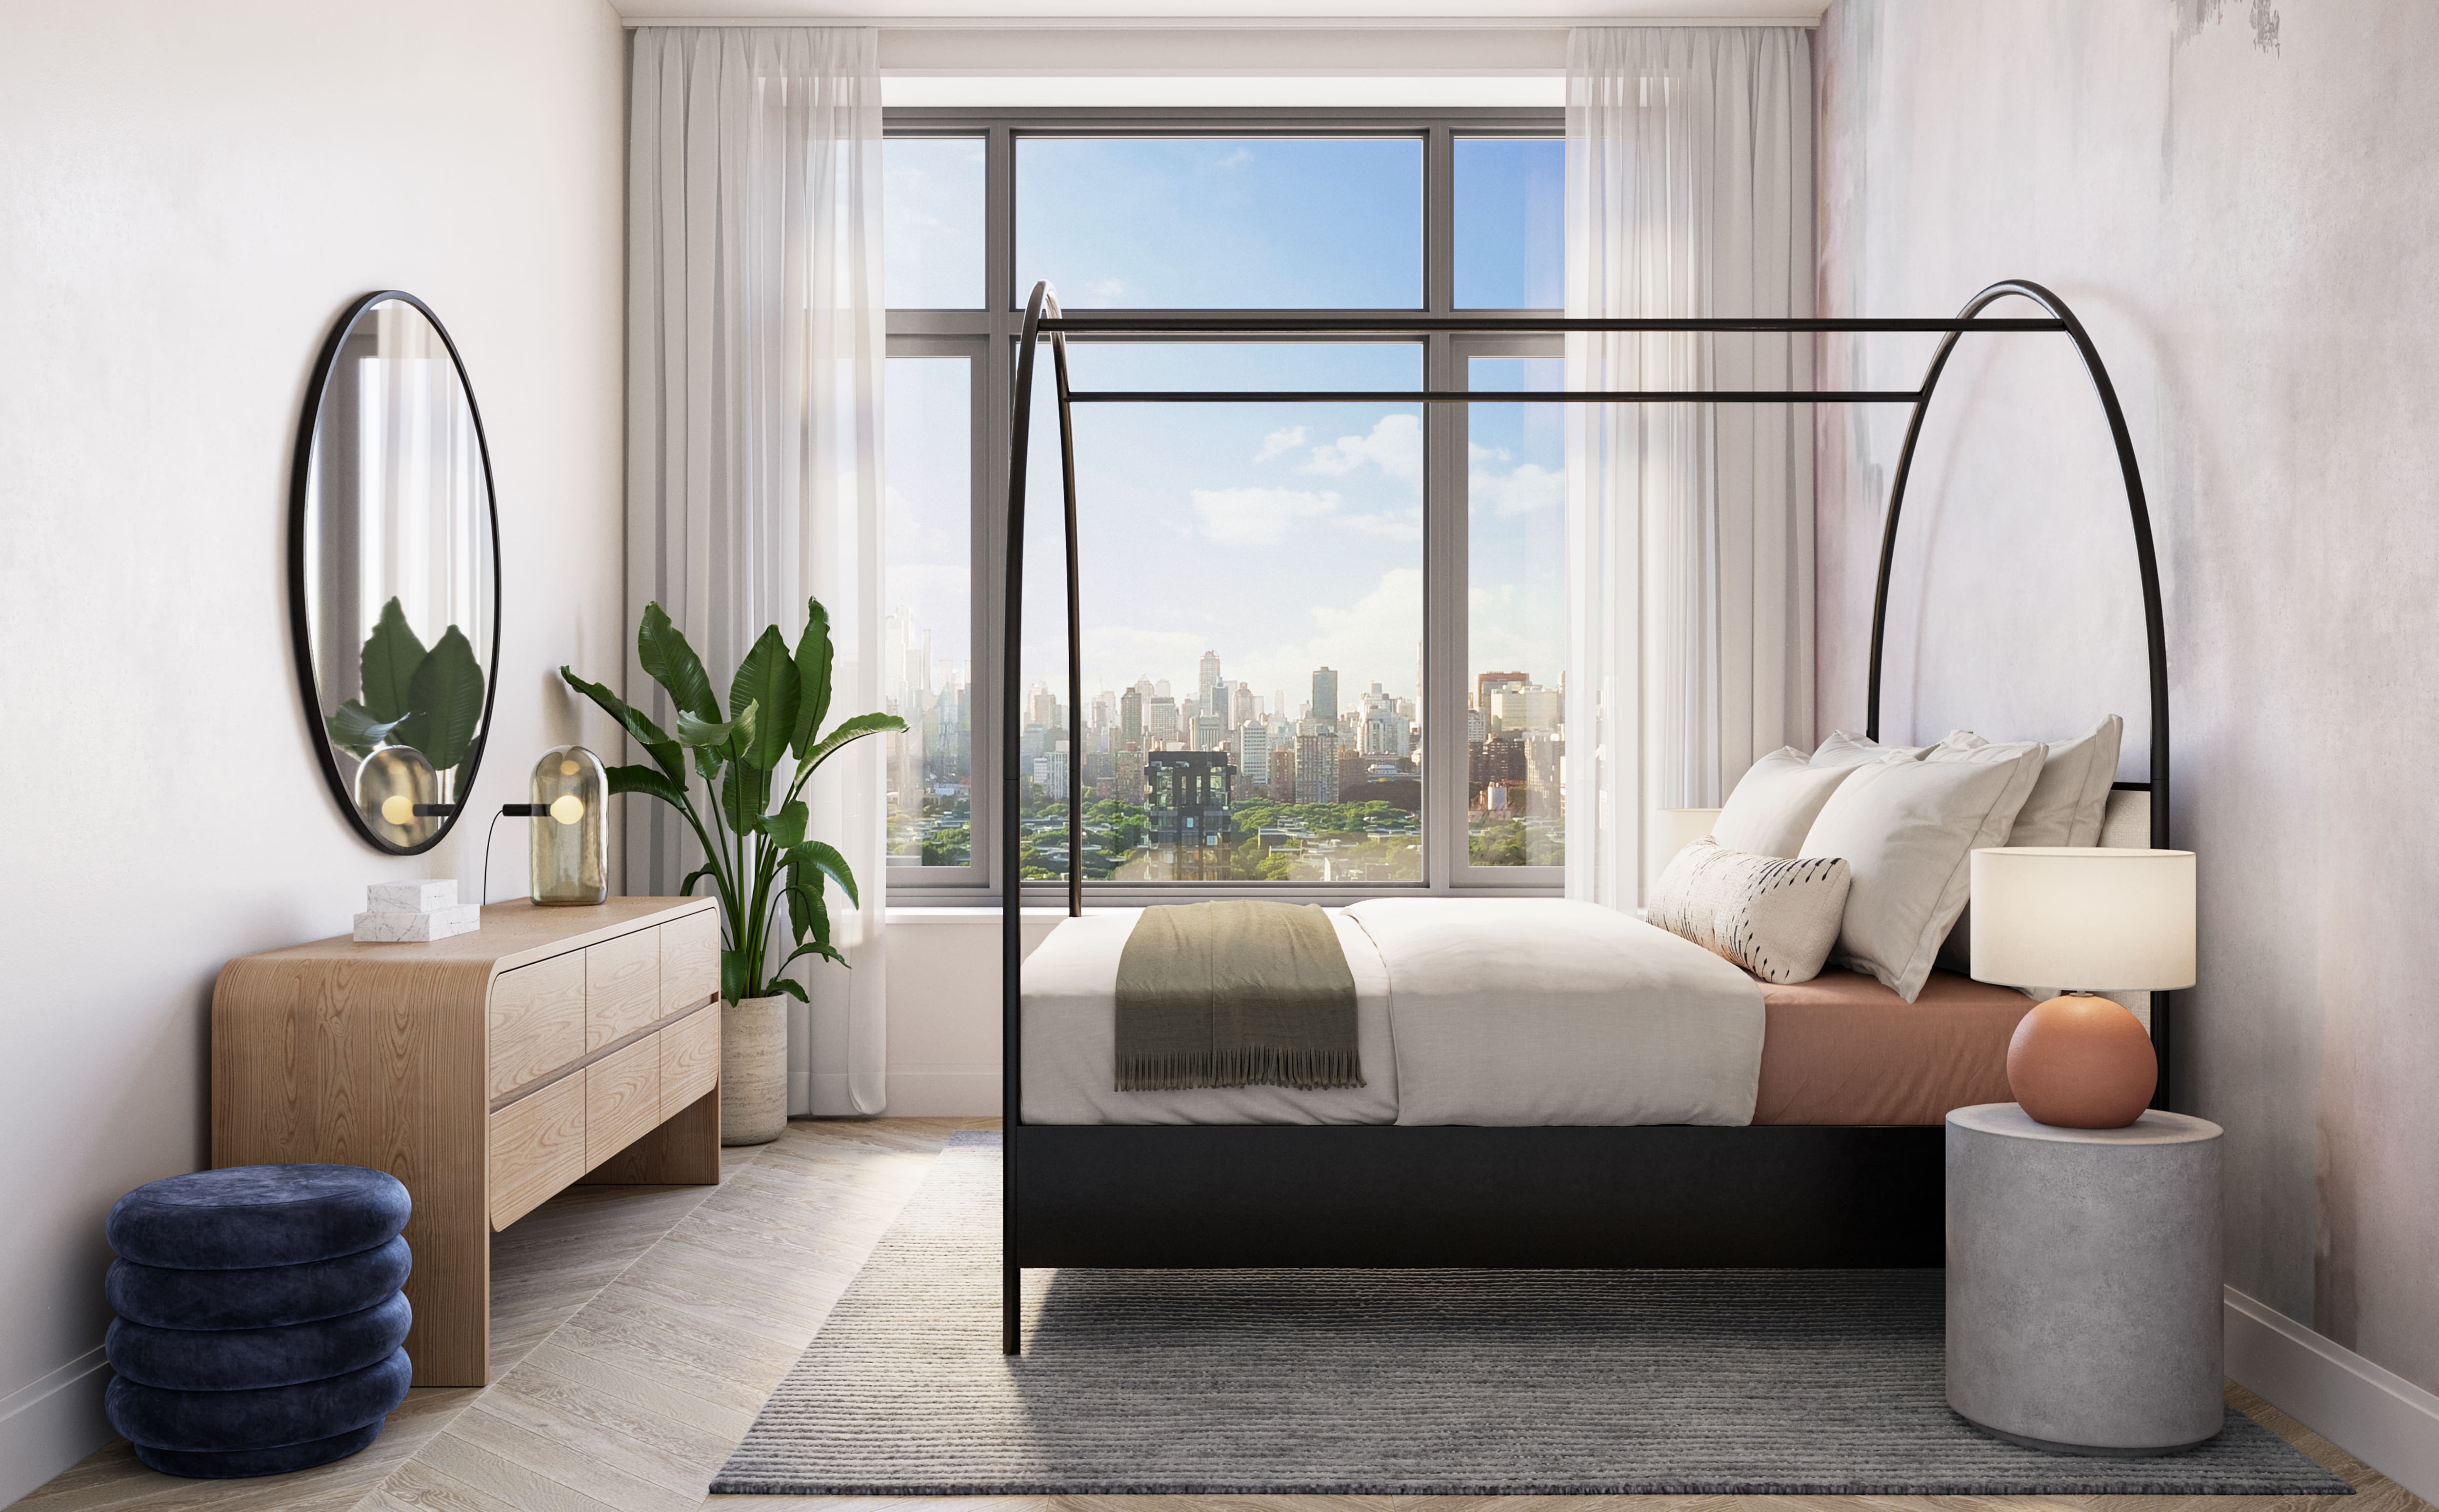 Light filled master bedroom in NOVA condos overlooking LIC New York. Bed and bedside table in front of dresser and mirror.